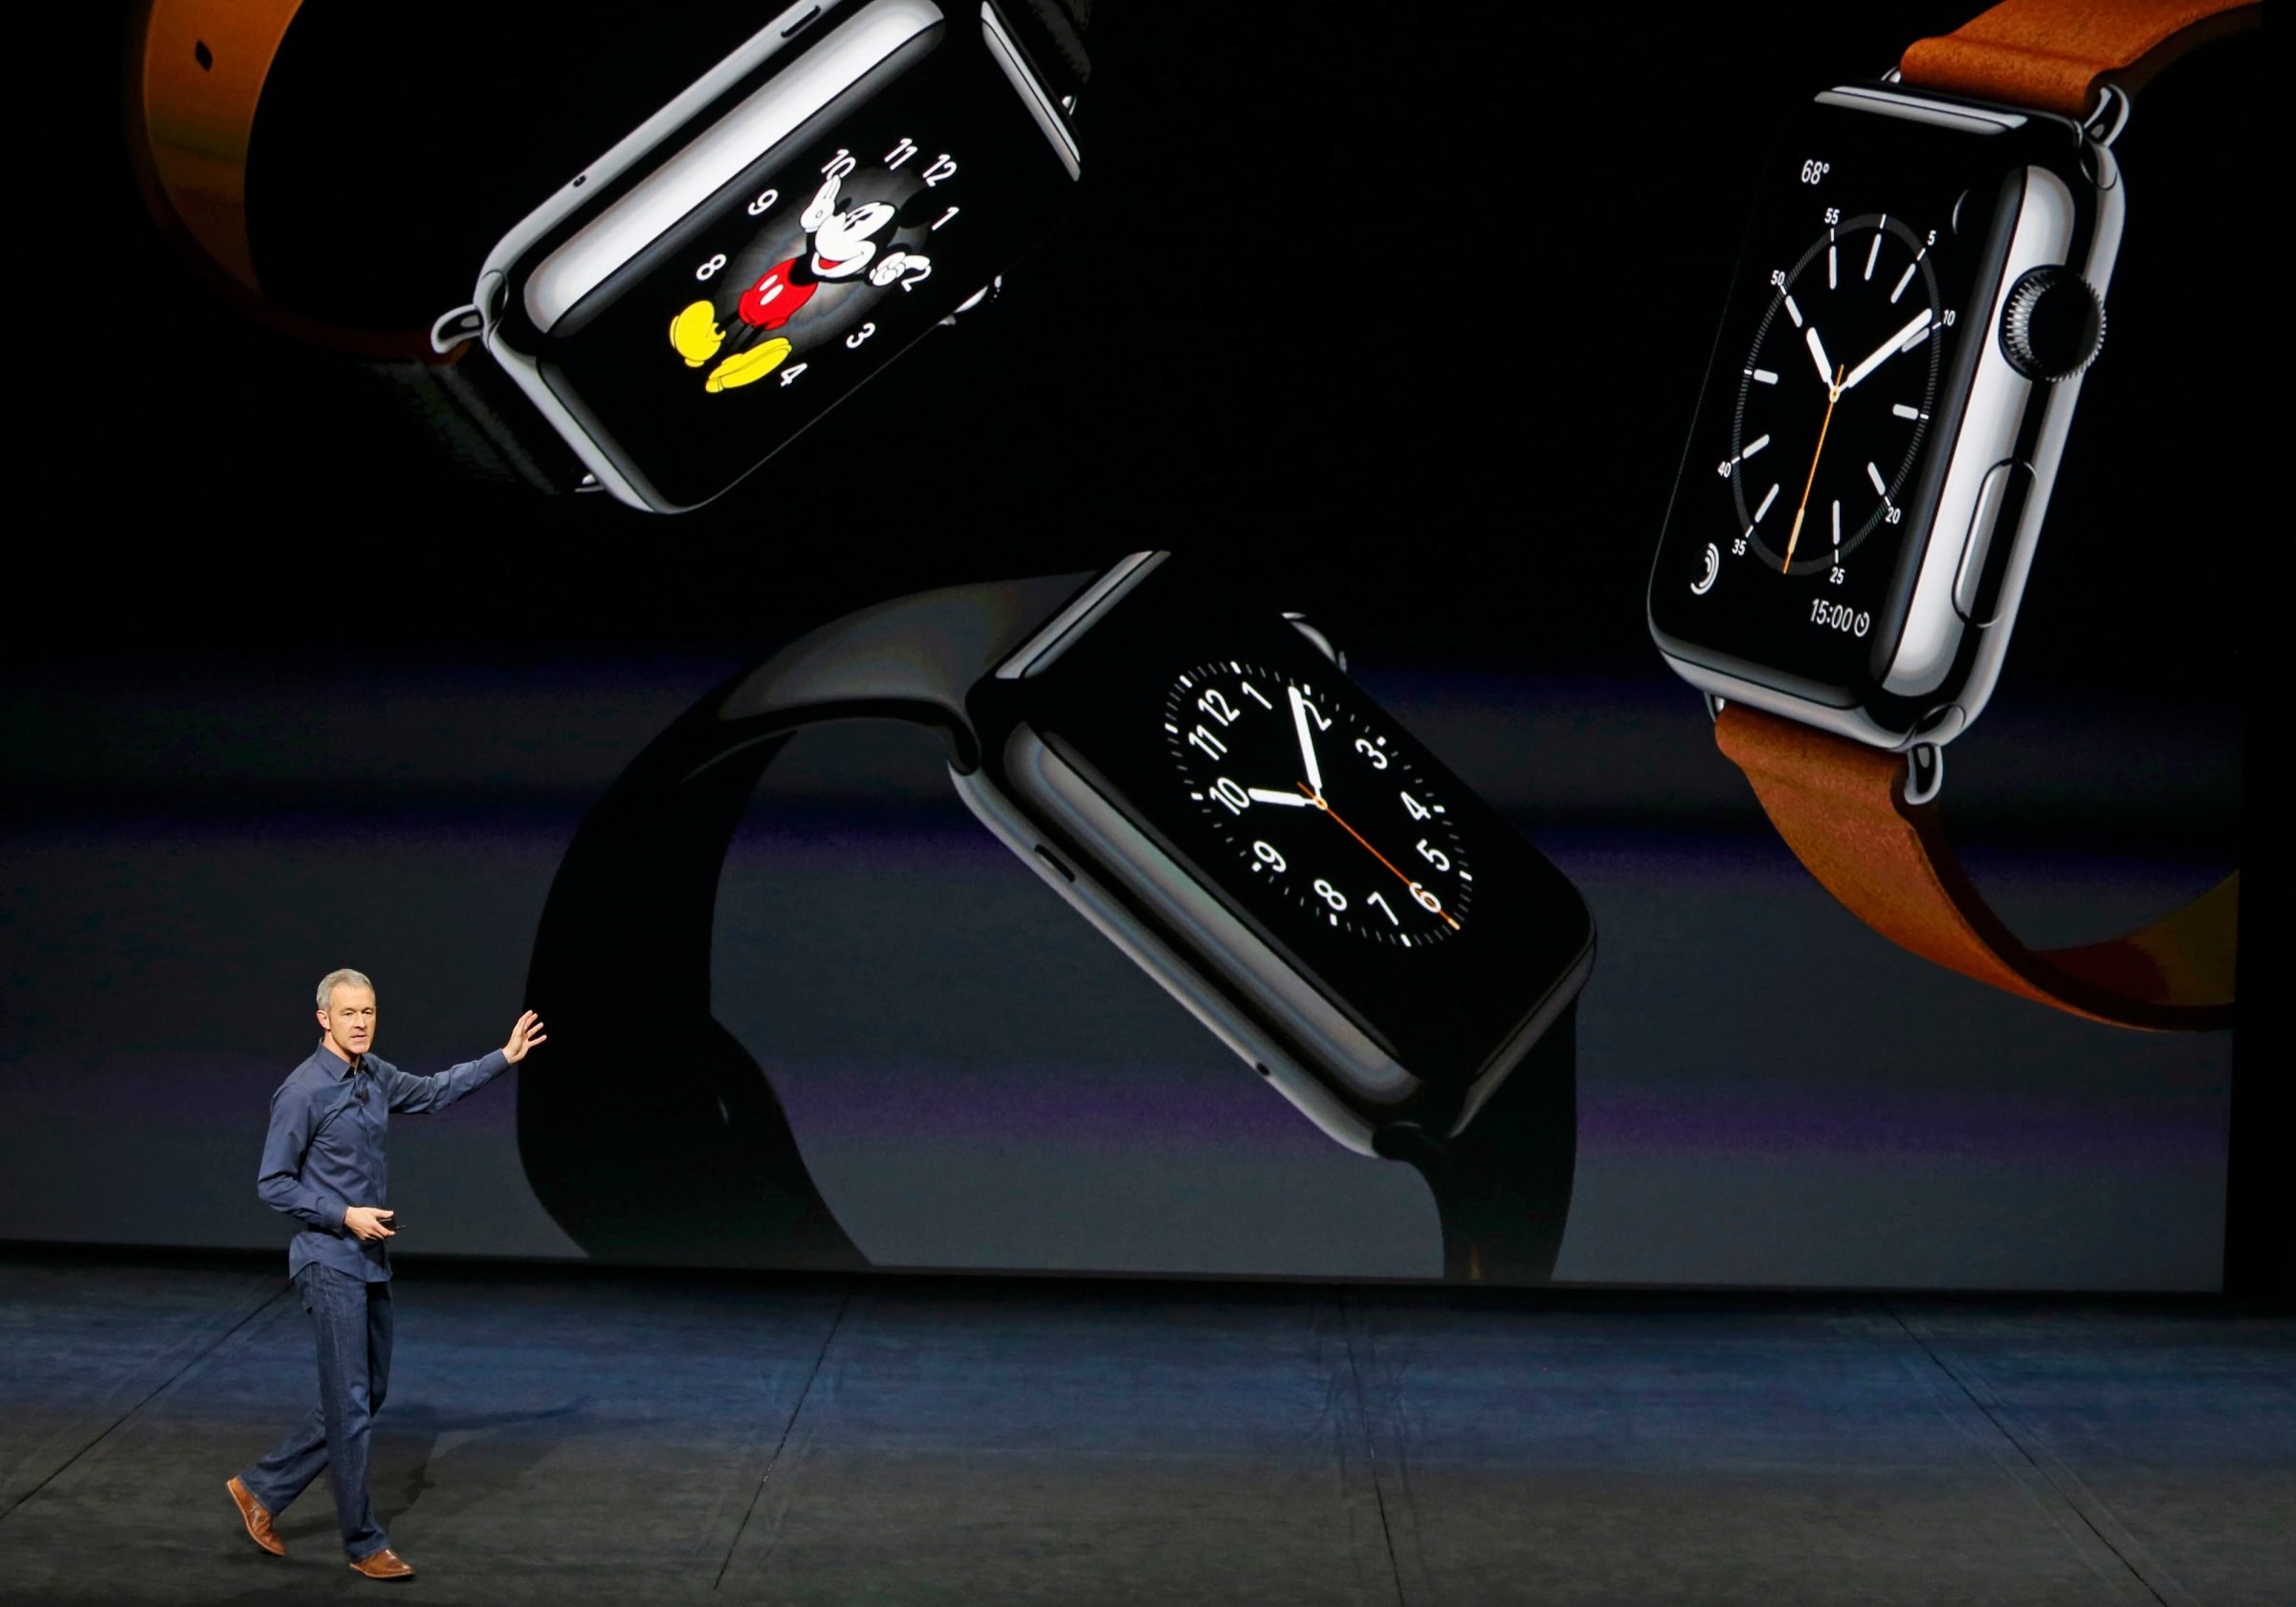 Jeff Williams Apple's senior vice president of Operations, speaks about new finishes for the Apple Watch during an Apple media event in San Francisco, California